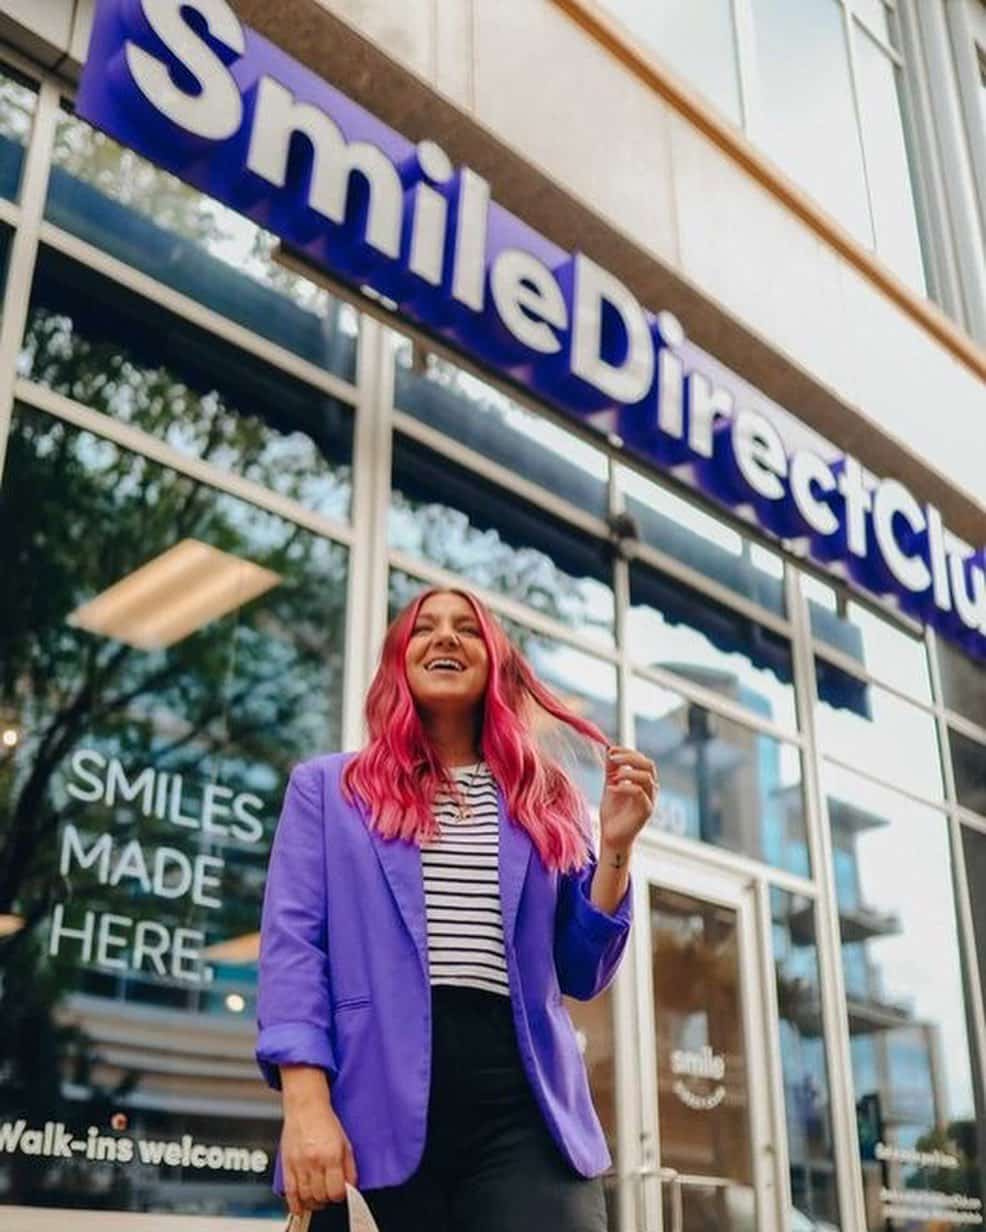 Smiling is contagious ~ especially on Fridays! Let the weekend commence.⁣⁣
⁣⁣
@kbousq ⁣
@smiledirectclub ⁣